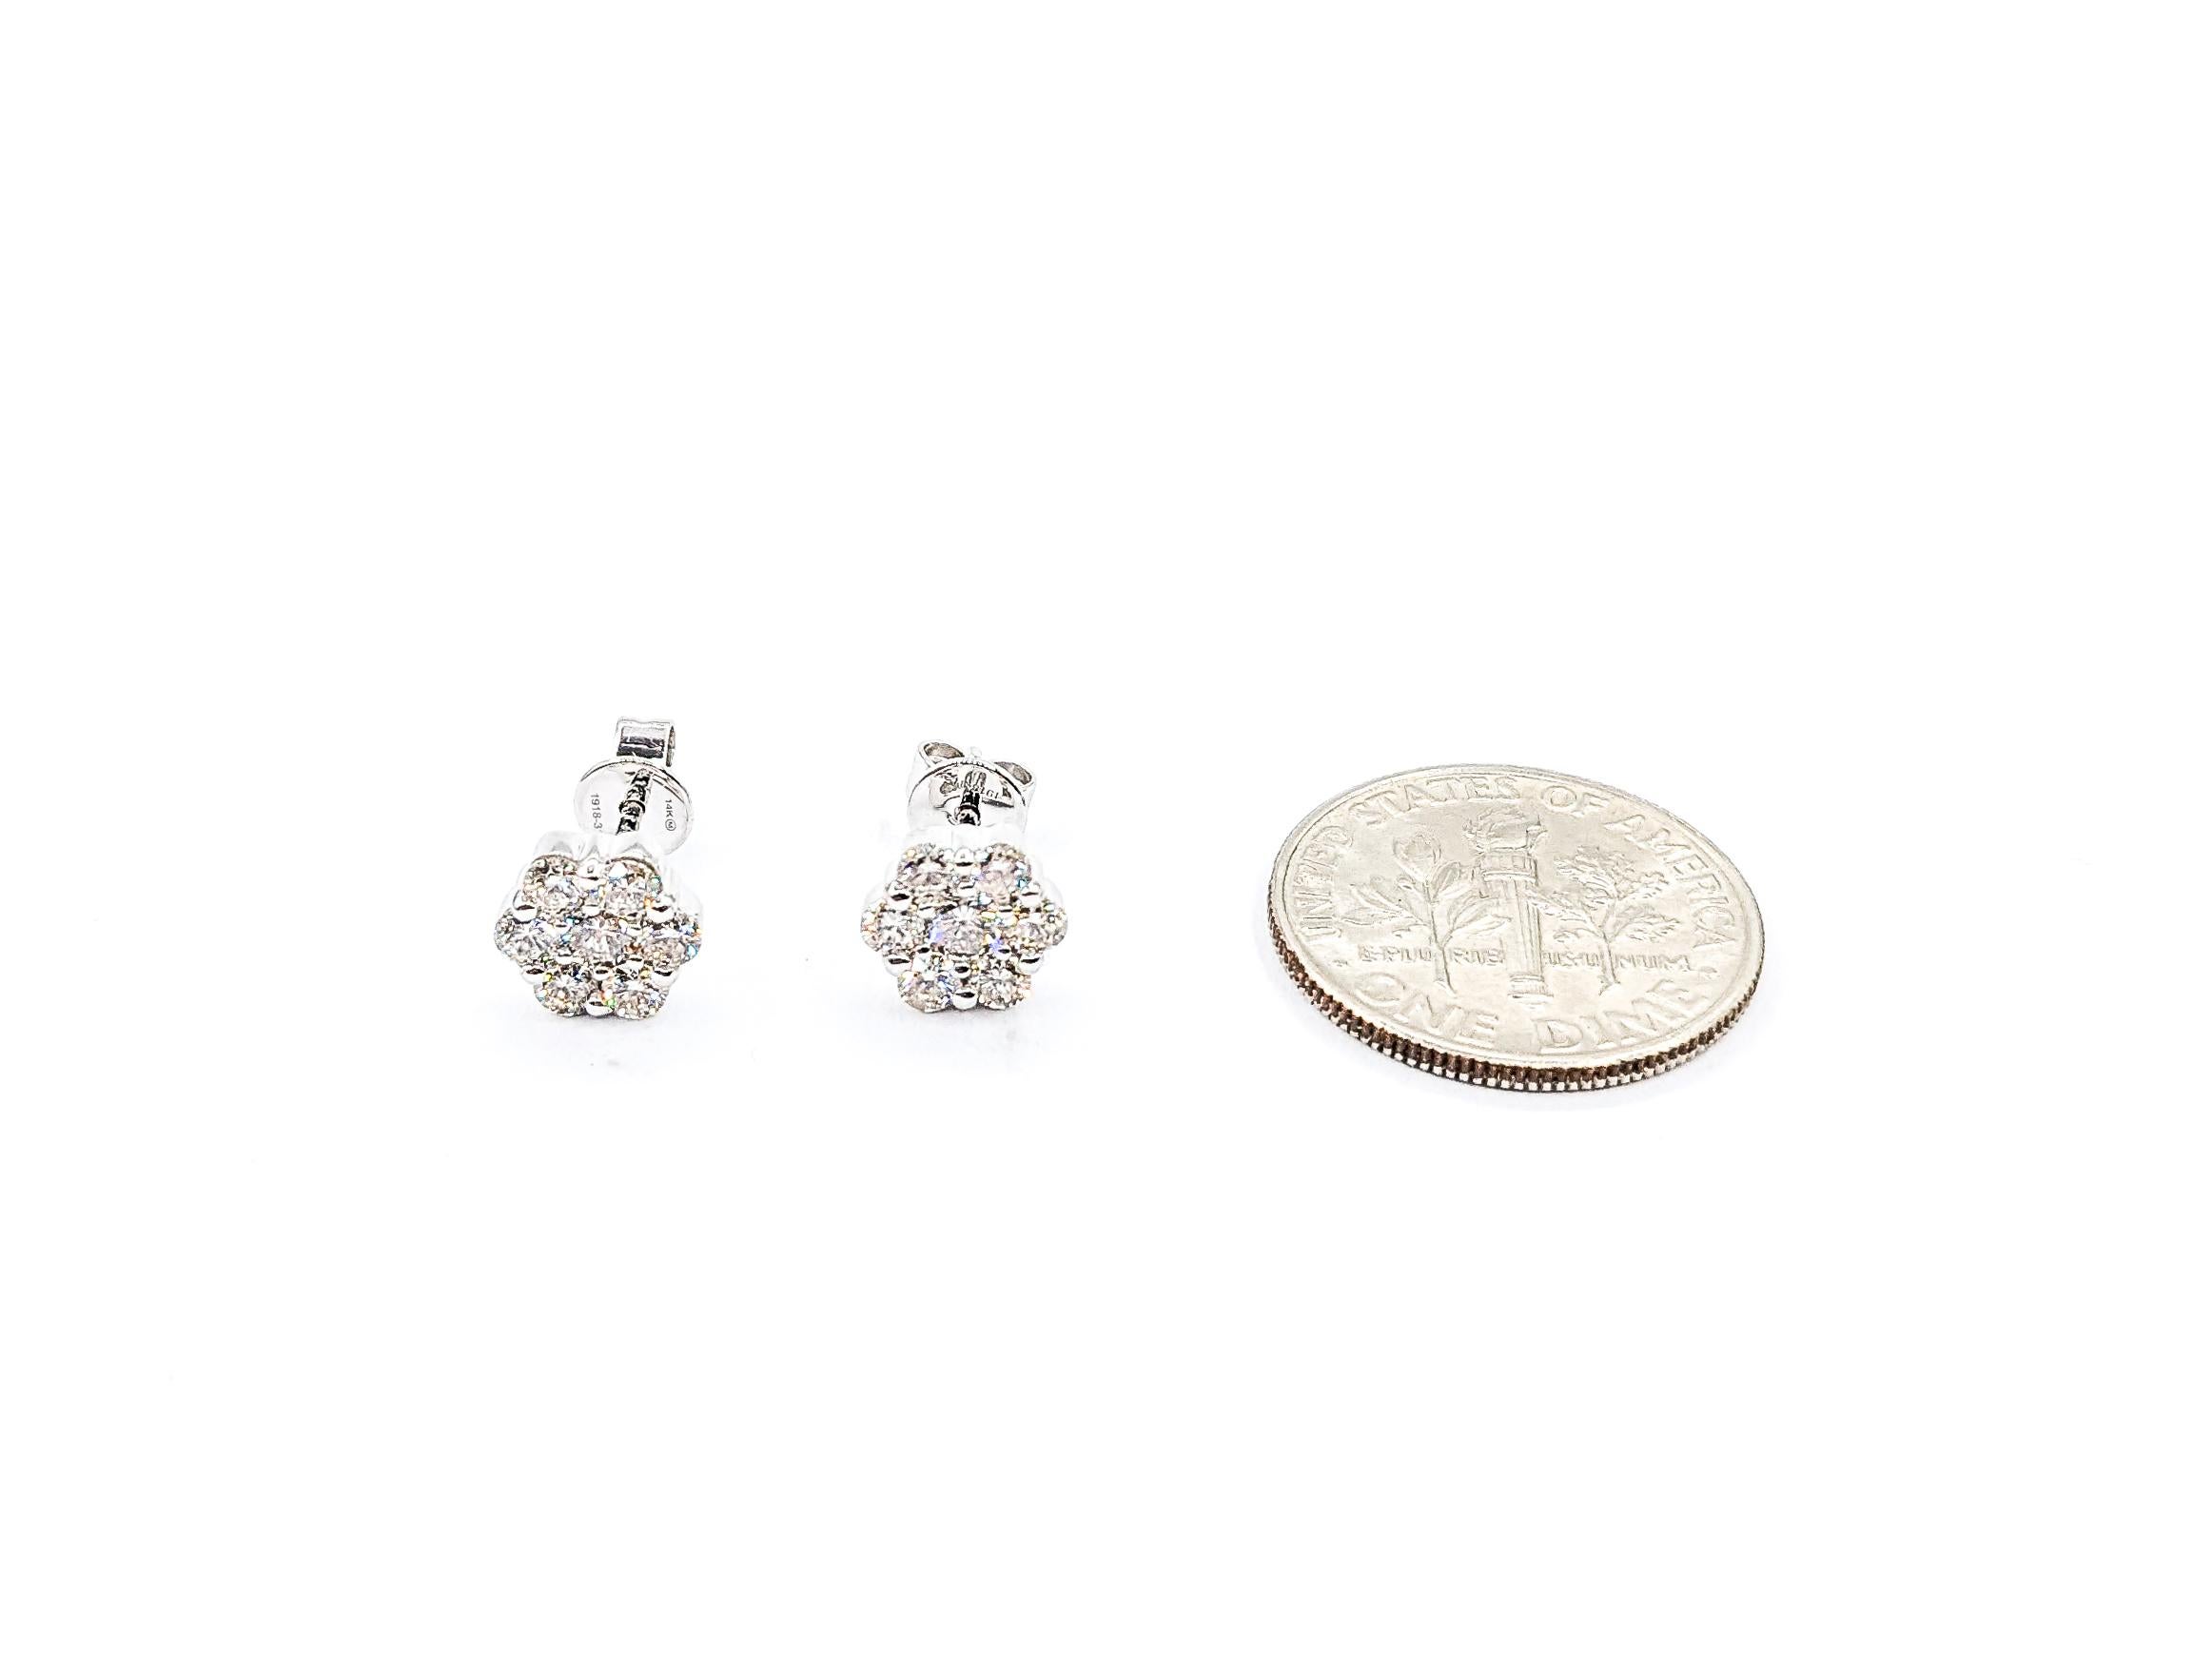 .77ctw Diamond Fashion Stud Earrings In White Gold


Discover the elegance of these Diamond Fashion Earrings, masterfully crafted in 14kt White Gold. These cocktail stud earrings boast .77ctw of diamonds, distinguished by SI clarity and a near